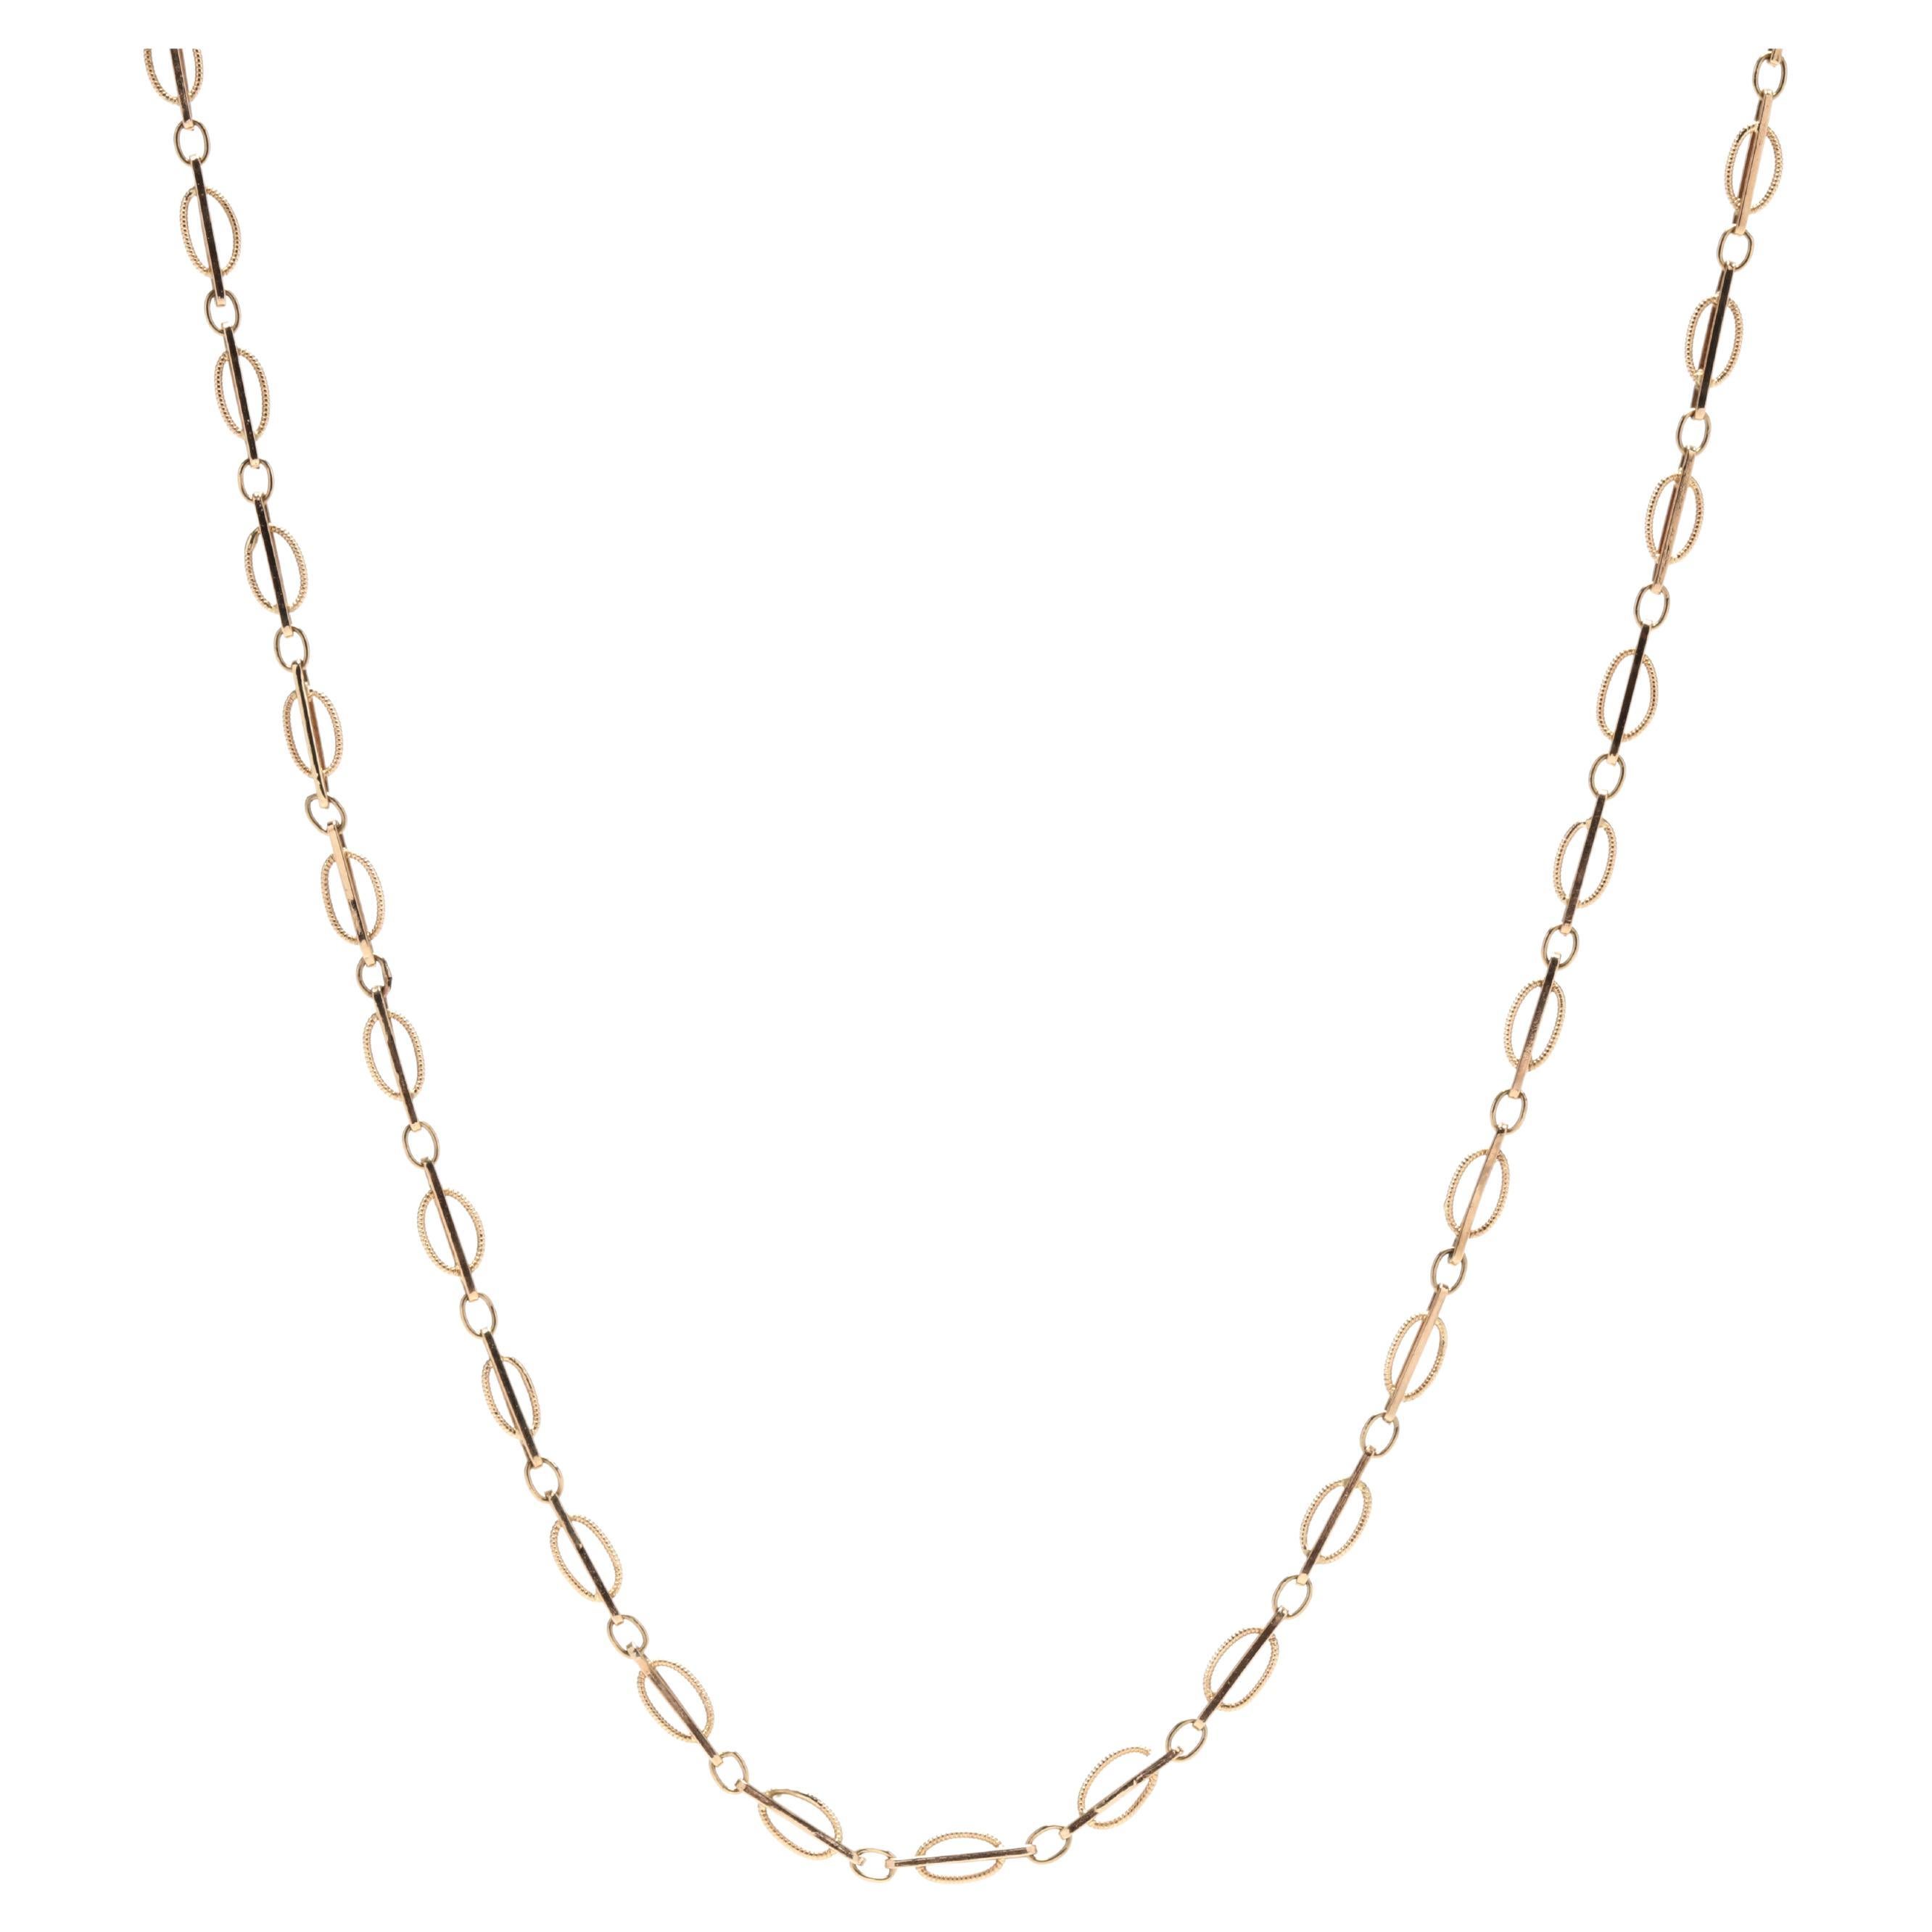 Fancy Oval Bar Link Chain Necklace, 14KT Yellow Gold